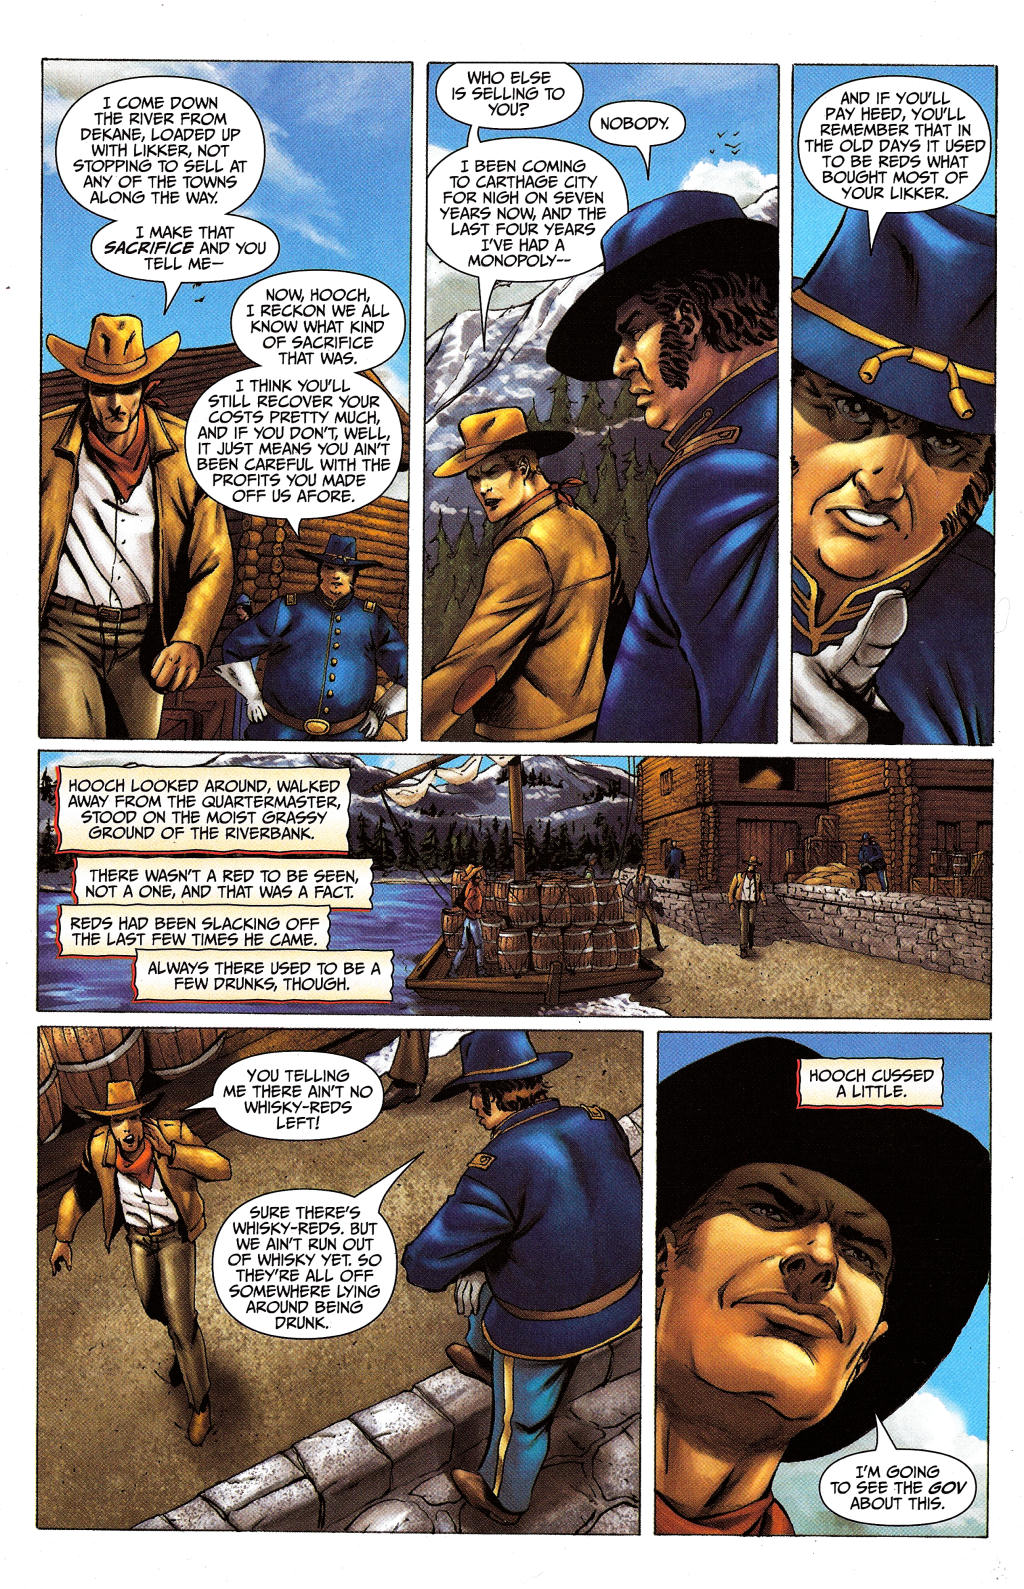 Red Prophet: The Tales of Alvin Maker issue 4 - Page 4